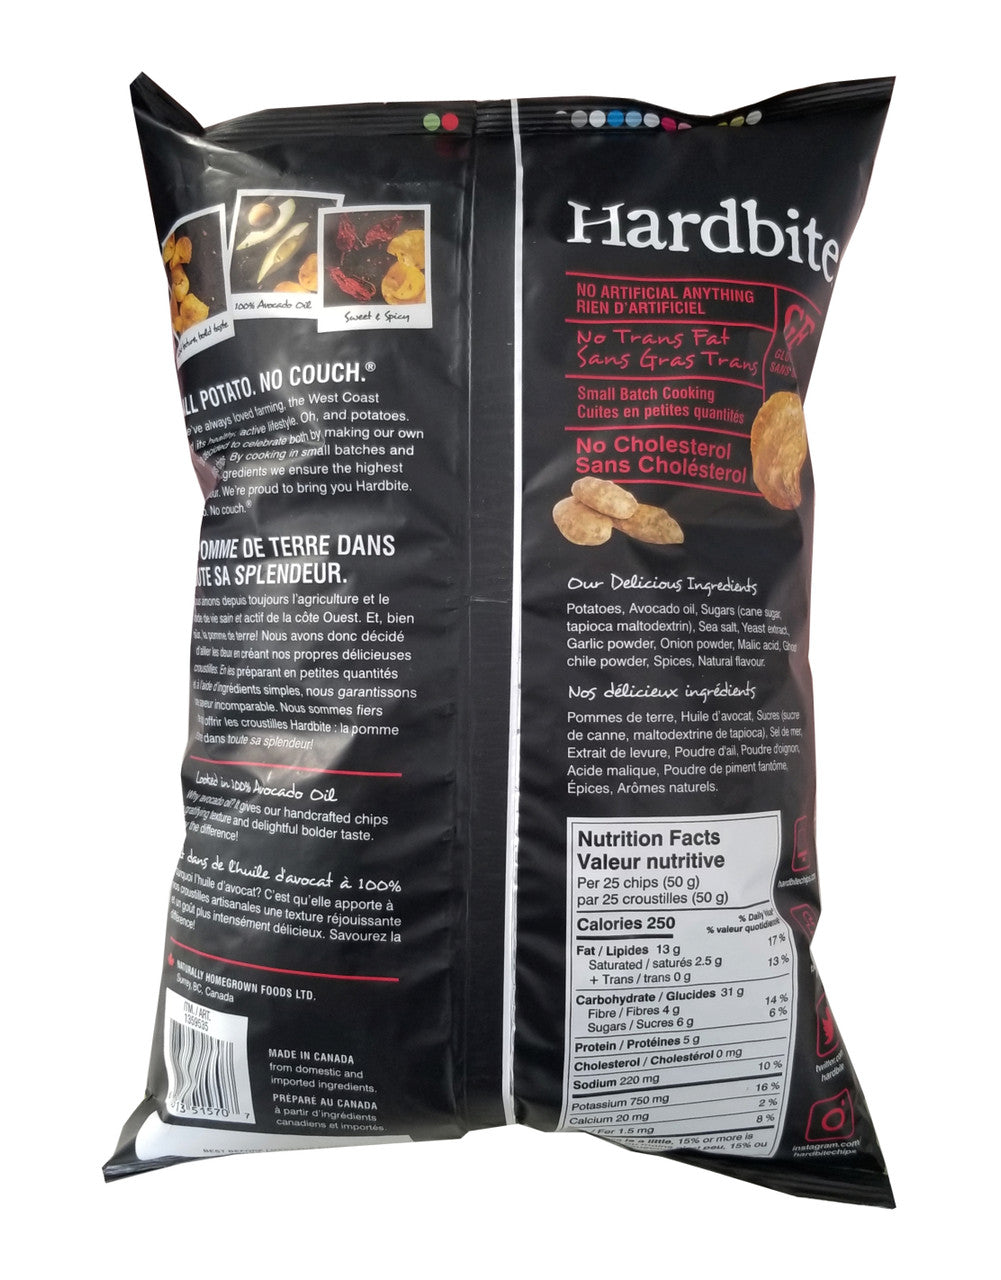 Hardbite Sweet Ghost Pepper baked in Avocado Oil Chips, 550g/1.2 lbs., Bag {Imported from Canada}